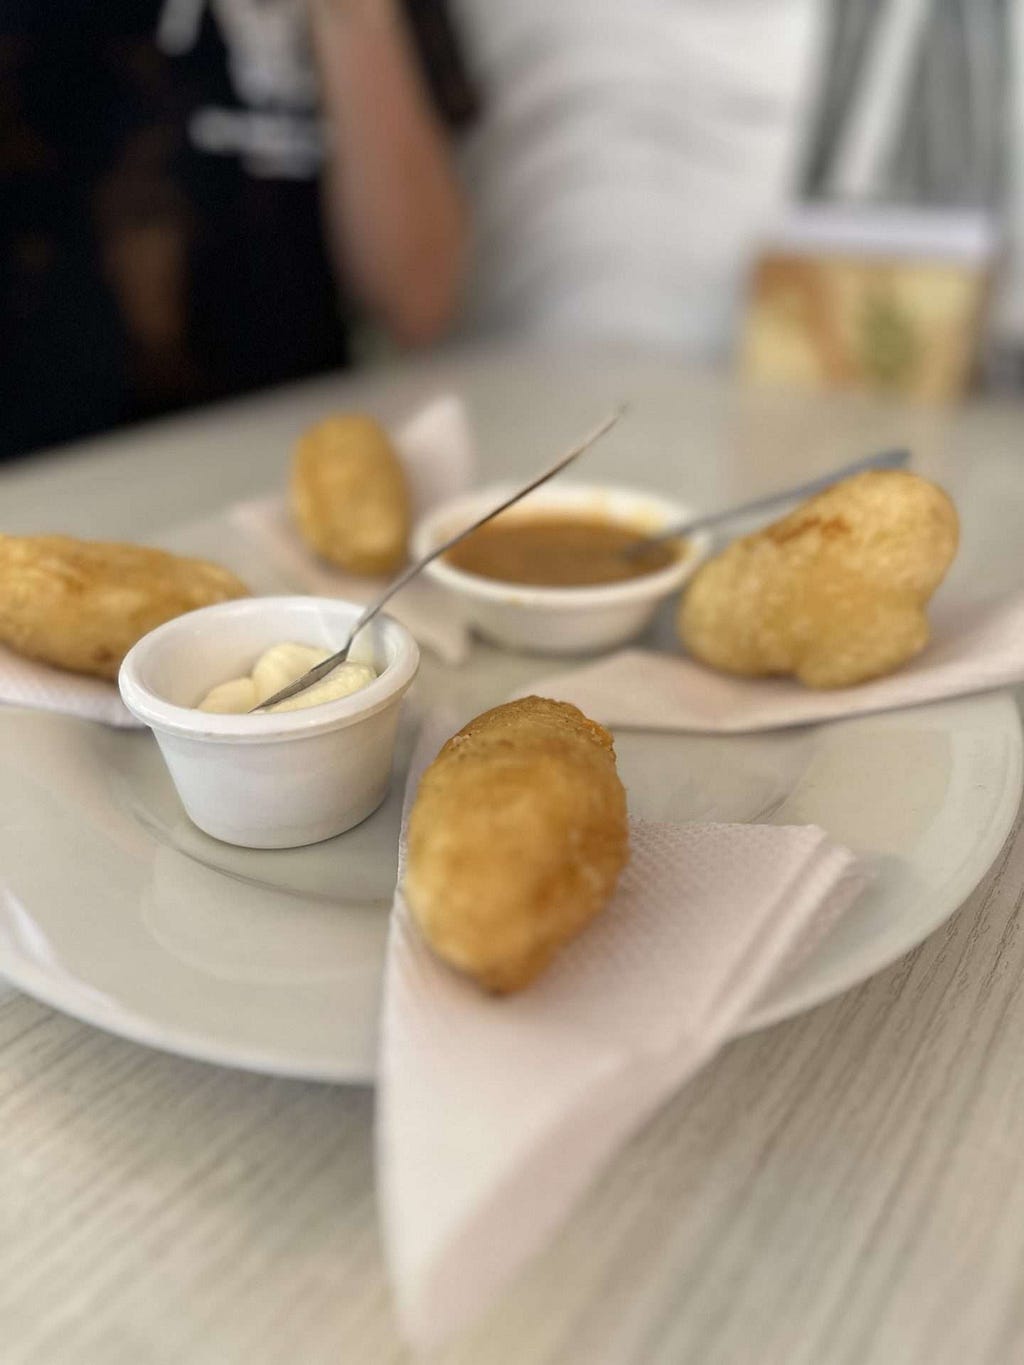 A plate with fried cassava fritters served on napkins, accompanied by small cups of dipping sauces with spoons, placed on a light-colored table.